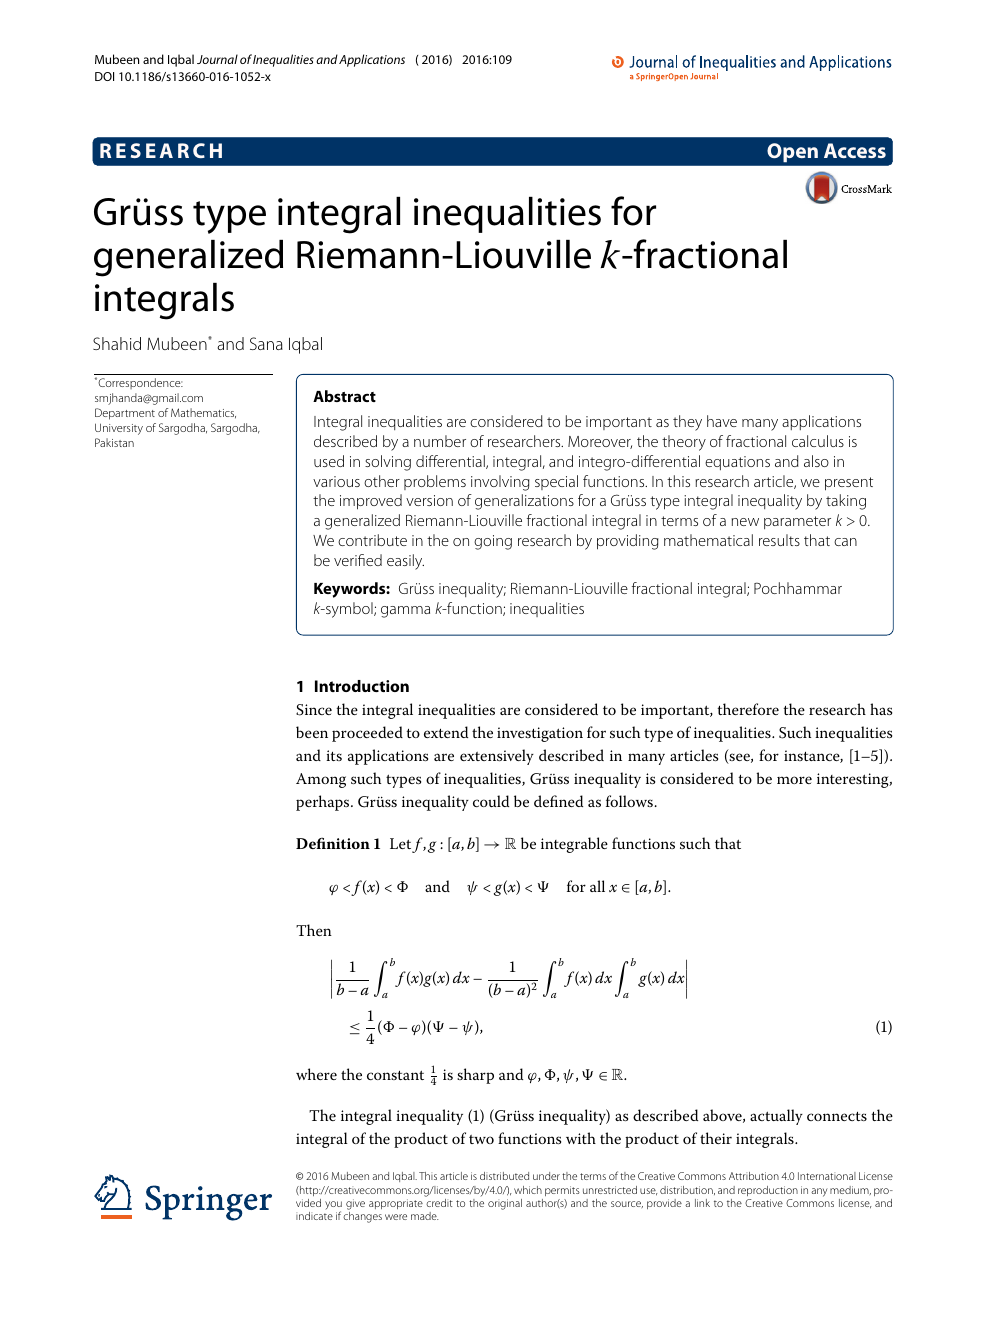 Gruss Type Integral Inequalities For Generalized Riemann Liouville K Fractional Integrals Topic Of Research Paper In Mathematics Download Scholarly Article Pdf And Read For Free On Cyberleninka Open Science Hub